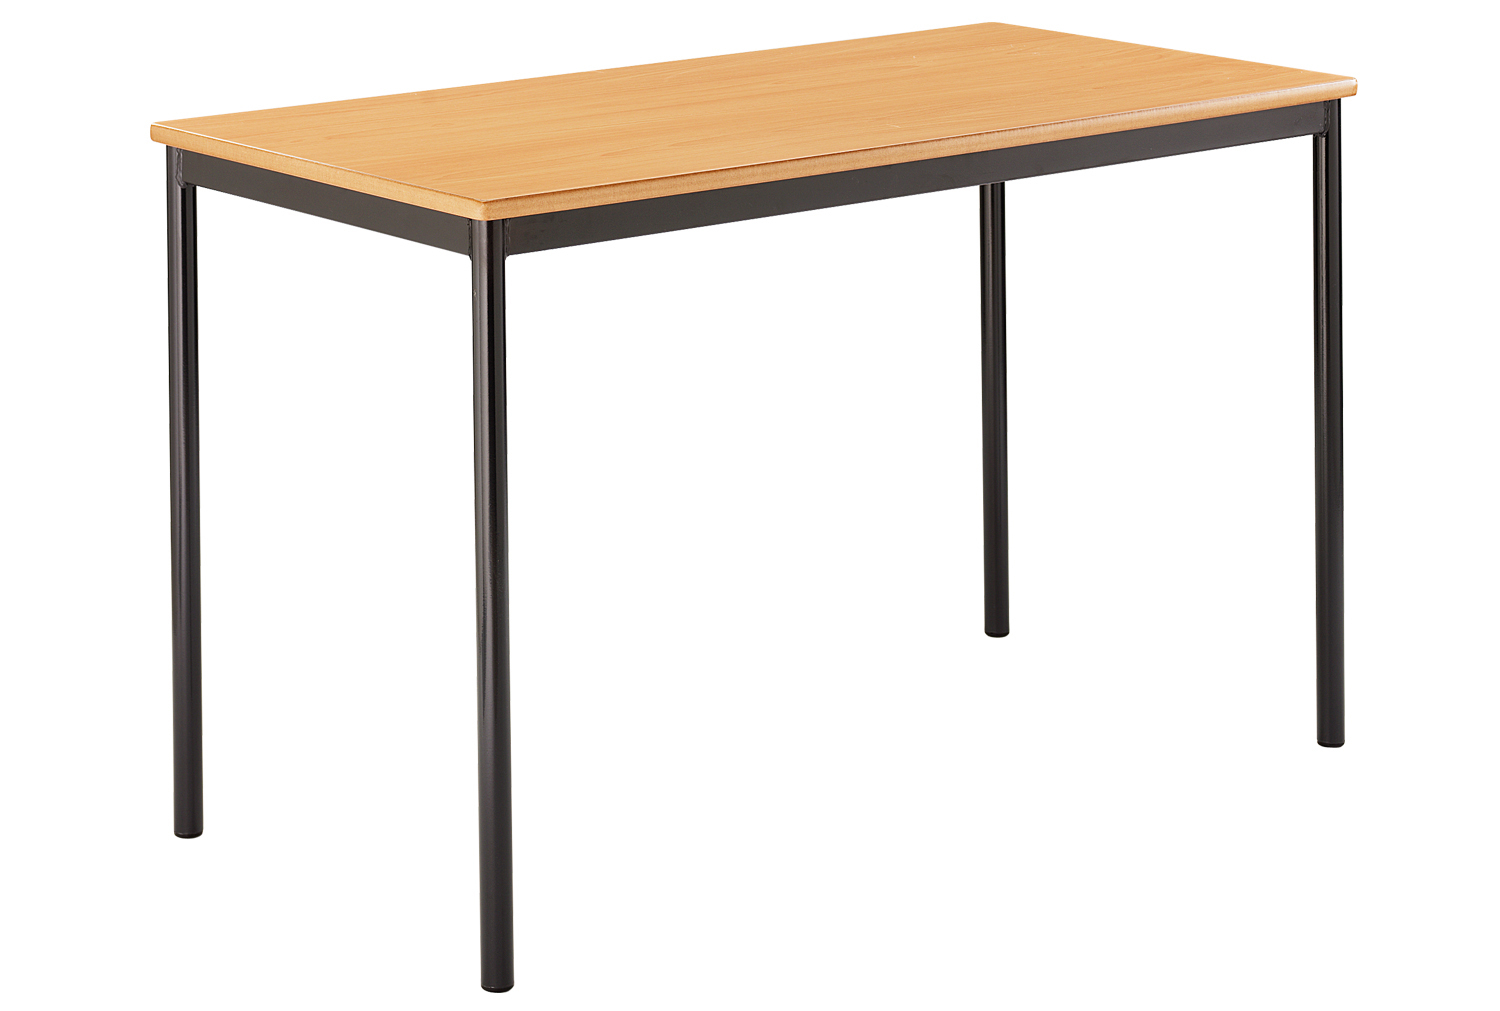 Qty 4 - Rectangular Fully Welded Classroom Tables 11-14 Years, 110wx55dx71h (cm), Light Grey Frame, Ailsa Top, ABS Grey Edge